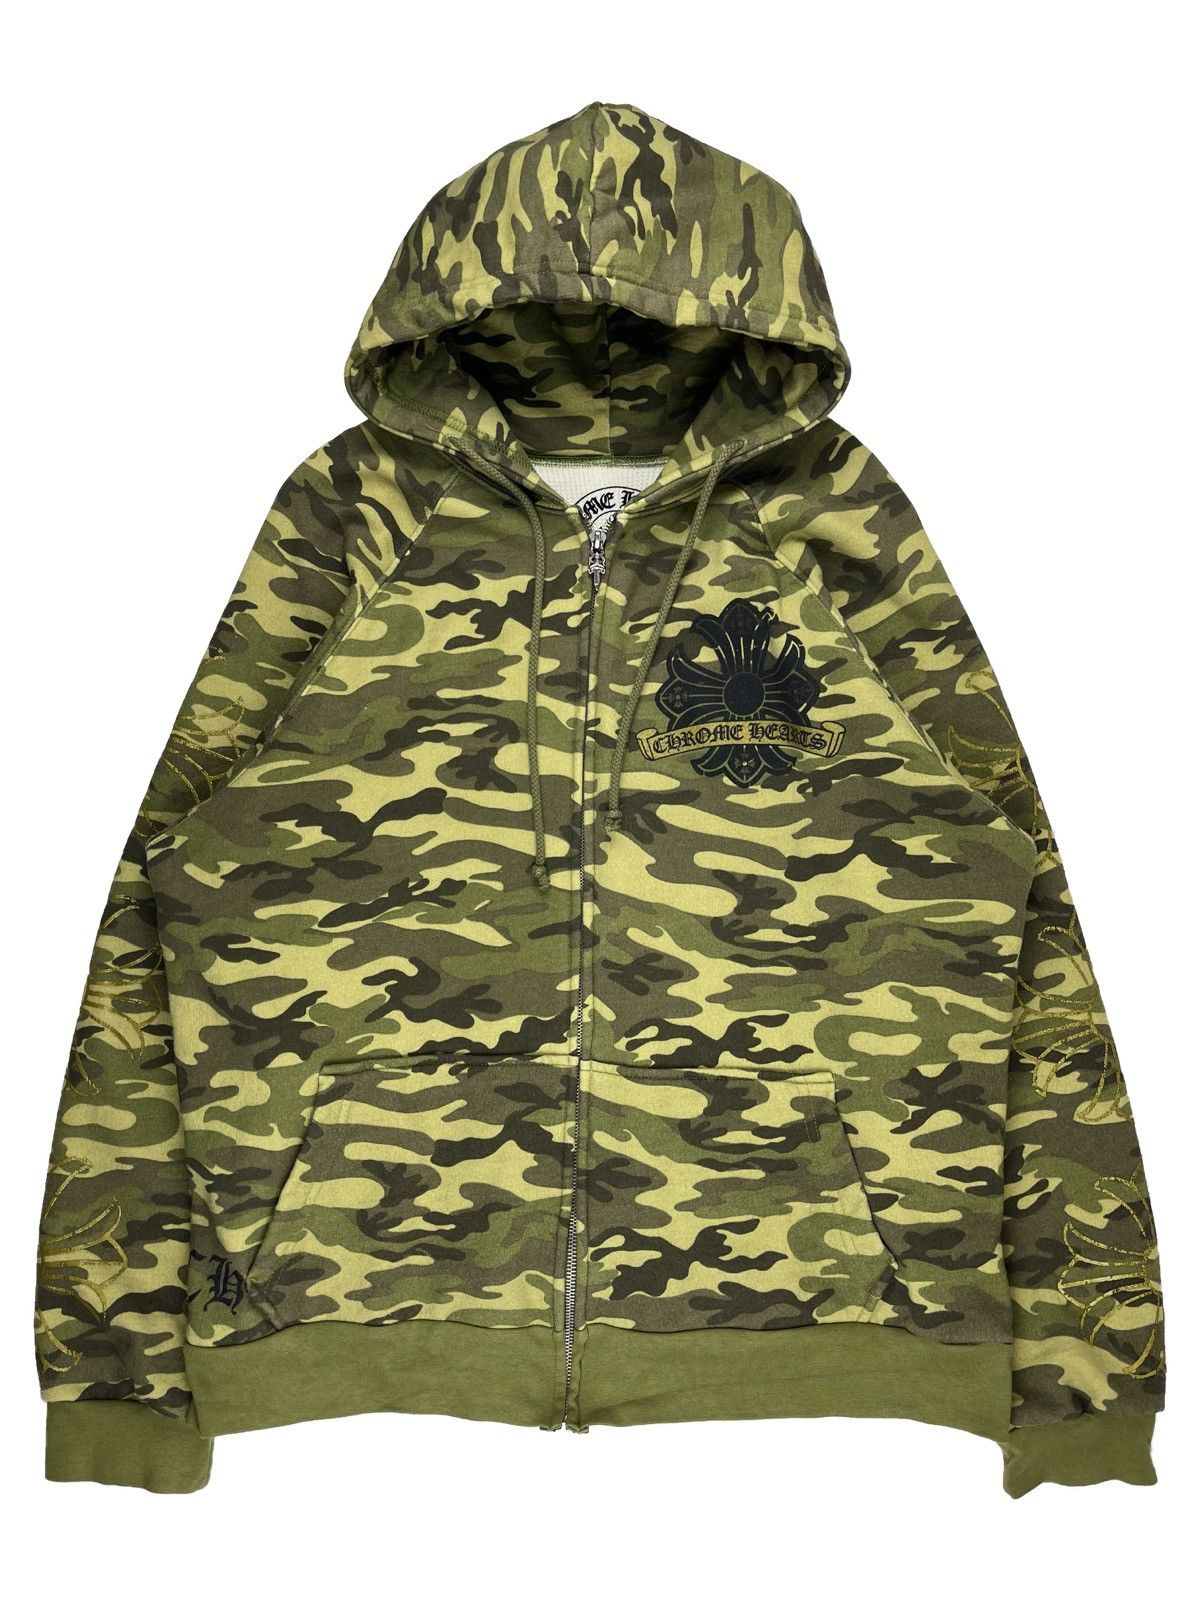 Pre-owned Chrome Hearts X Vintage Chrome Hearts Camouflage Plus Horseshoe Logo Zip Up Hoodie